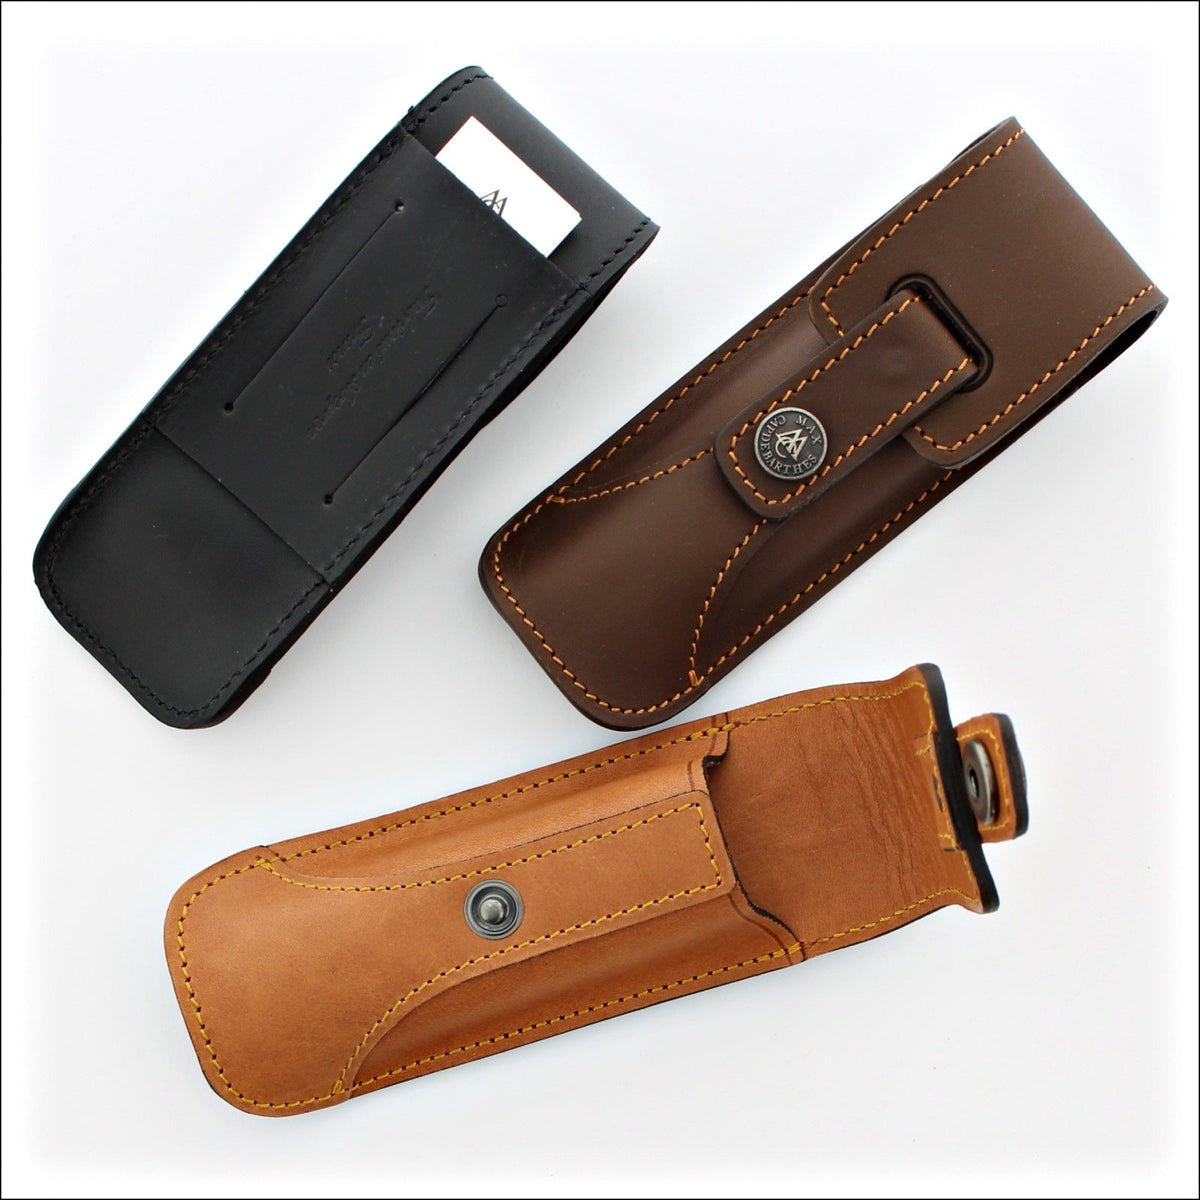 Imported Leather Knife Sheaths Sized to Fit - Knives for Sale